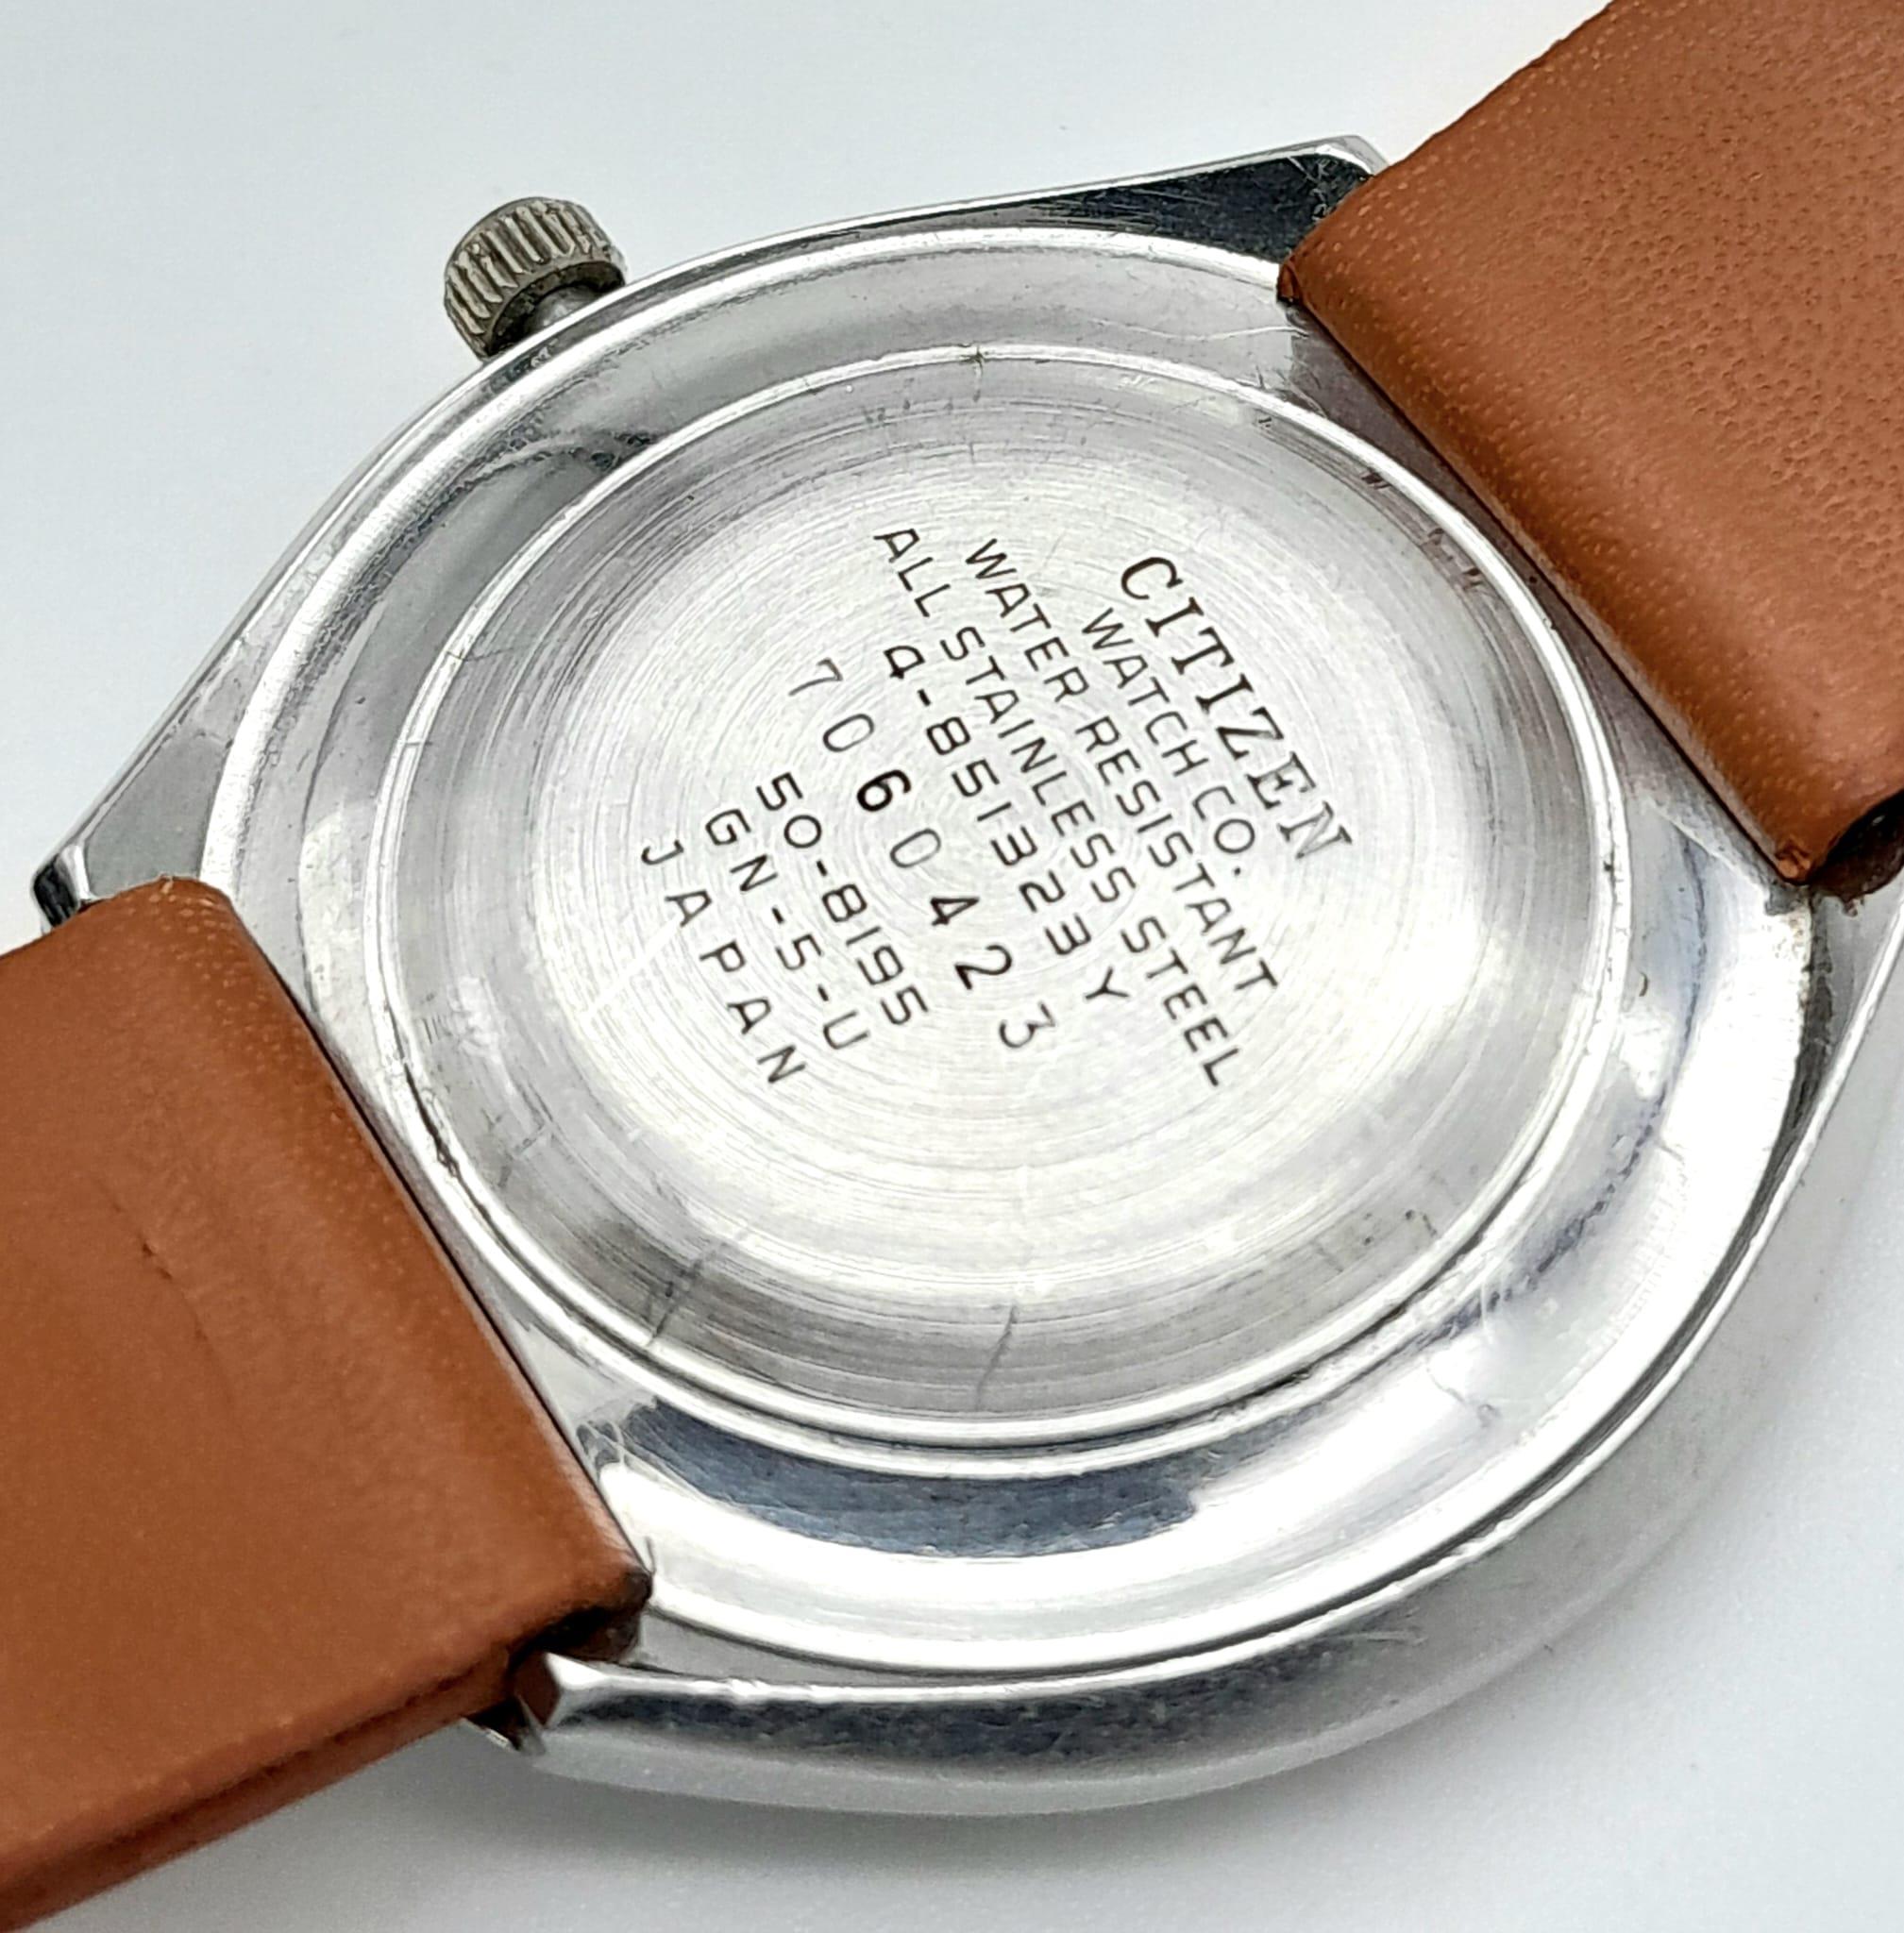 A Vintage Citizen Quartz Gents Watch. Brown leather strap. Stainless steel case - 36mm. Metallic - Image 6 of 7